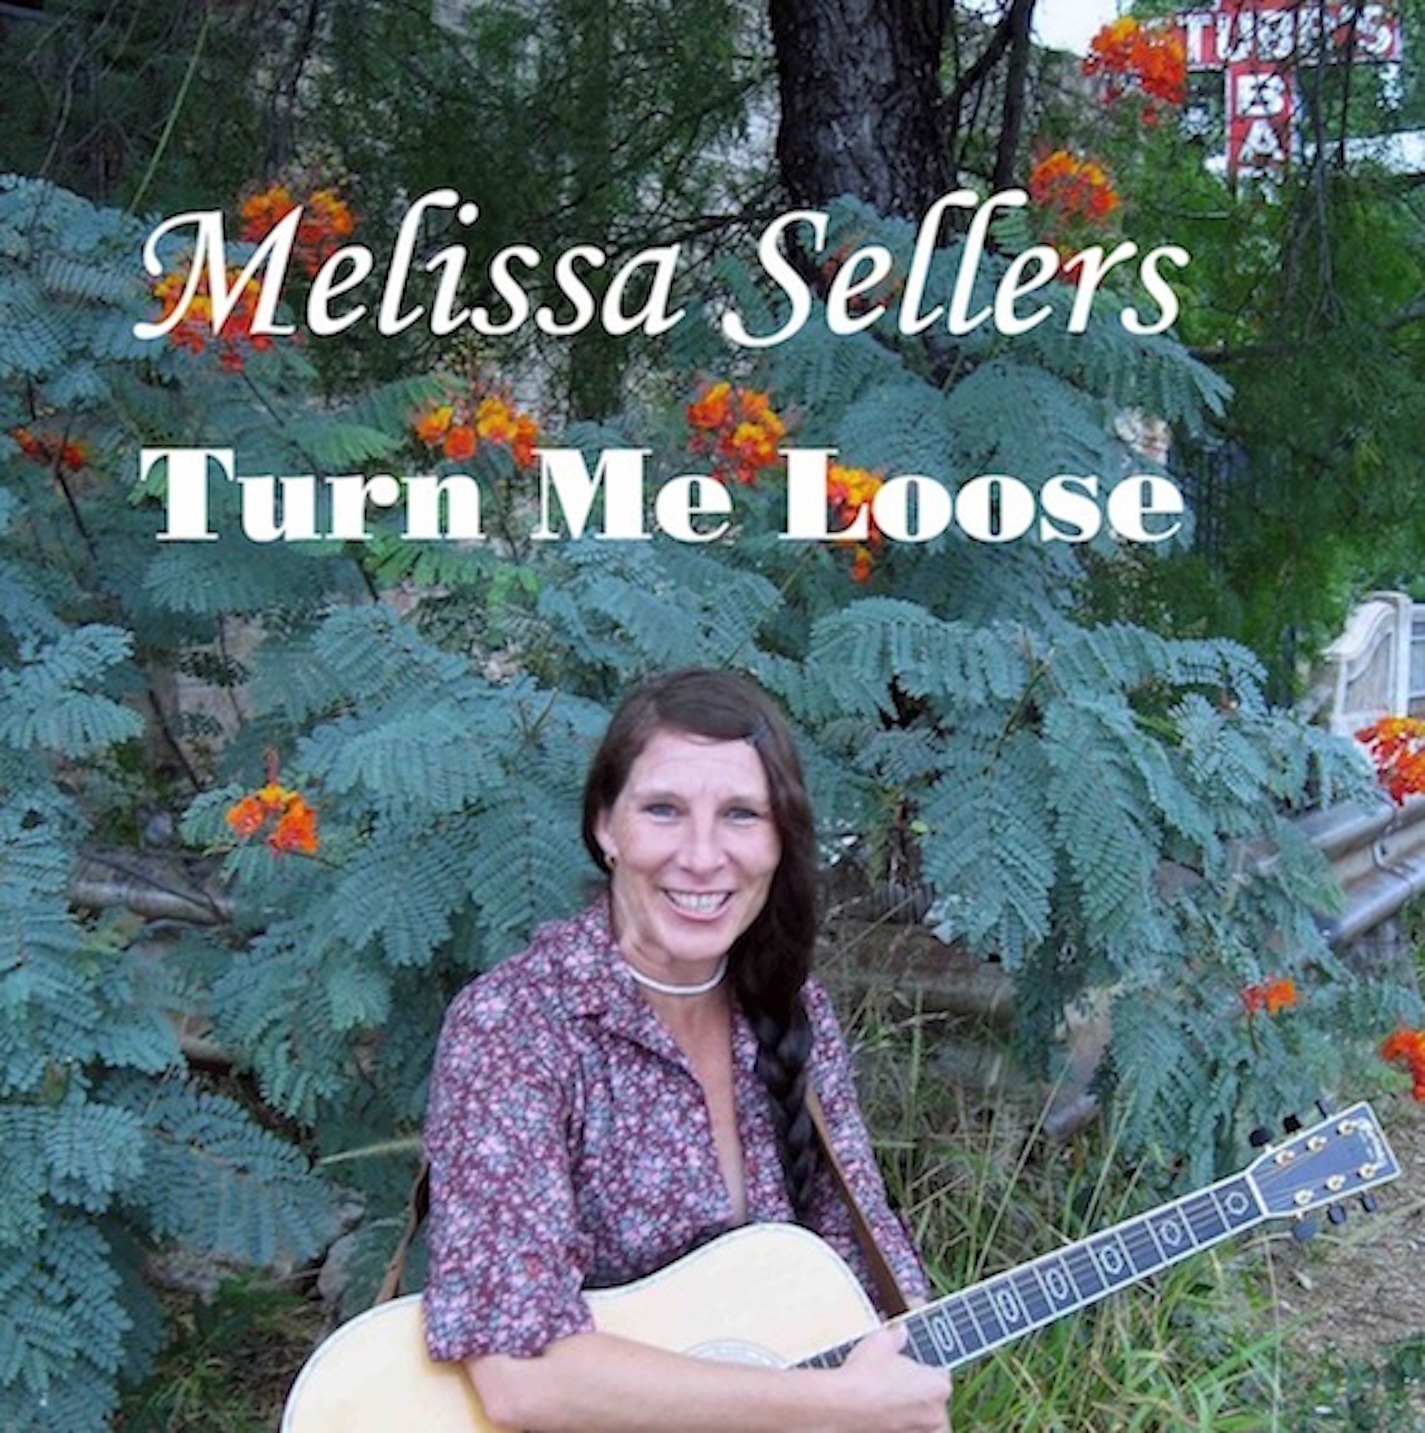 Melissa Sellers Band CD cover for Turn Me Loose